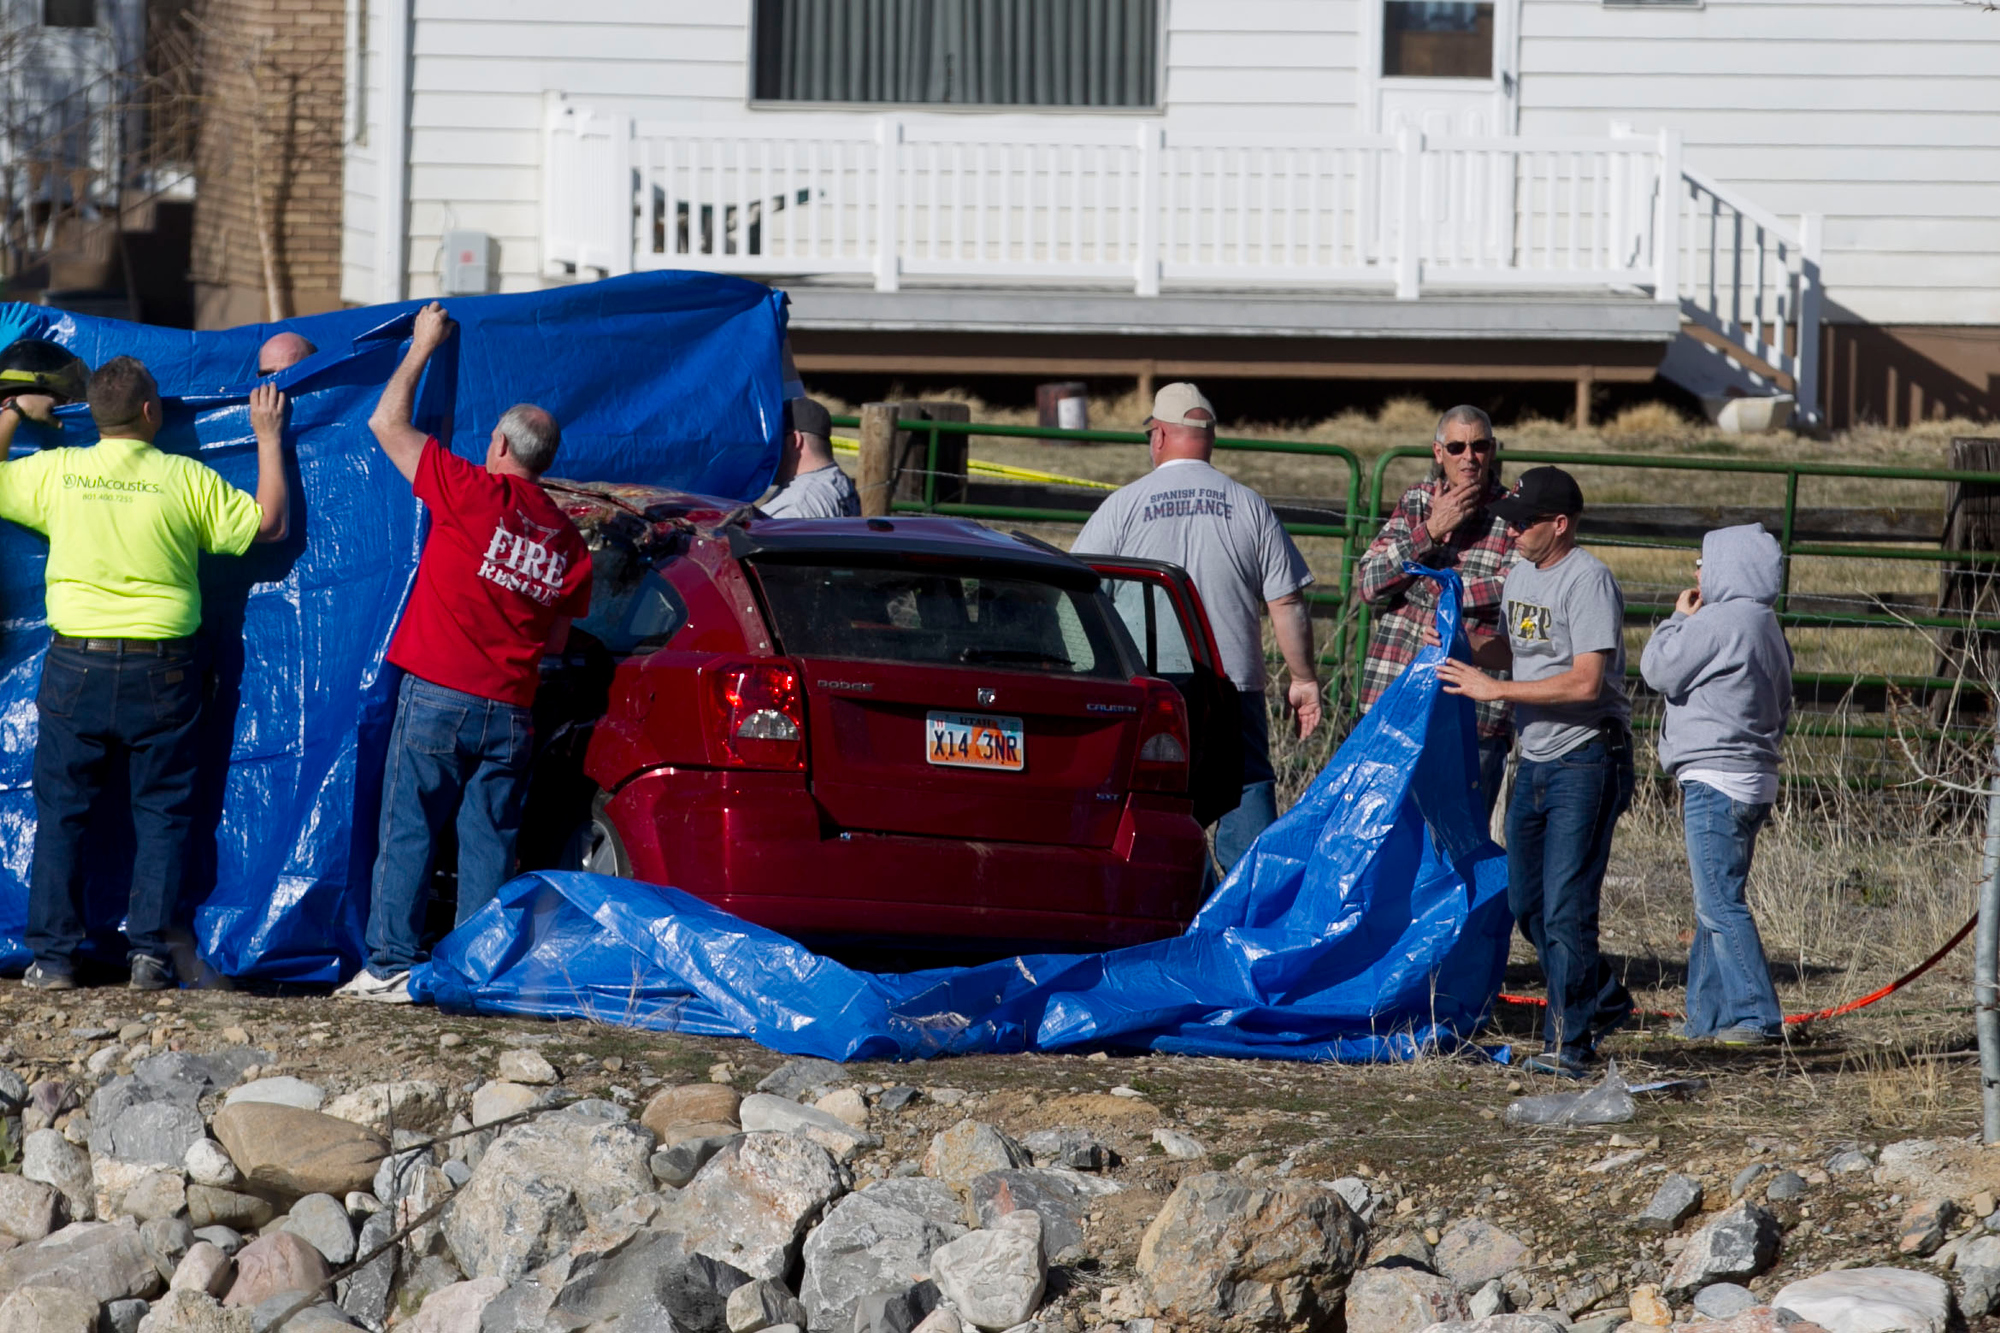 In this March 7, 2015 photo, officials respond to a report of a car crash in a river in Spanish Fork, Utah